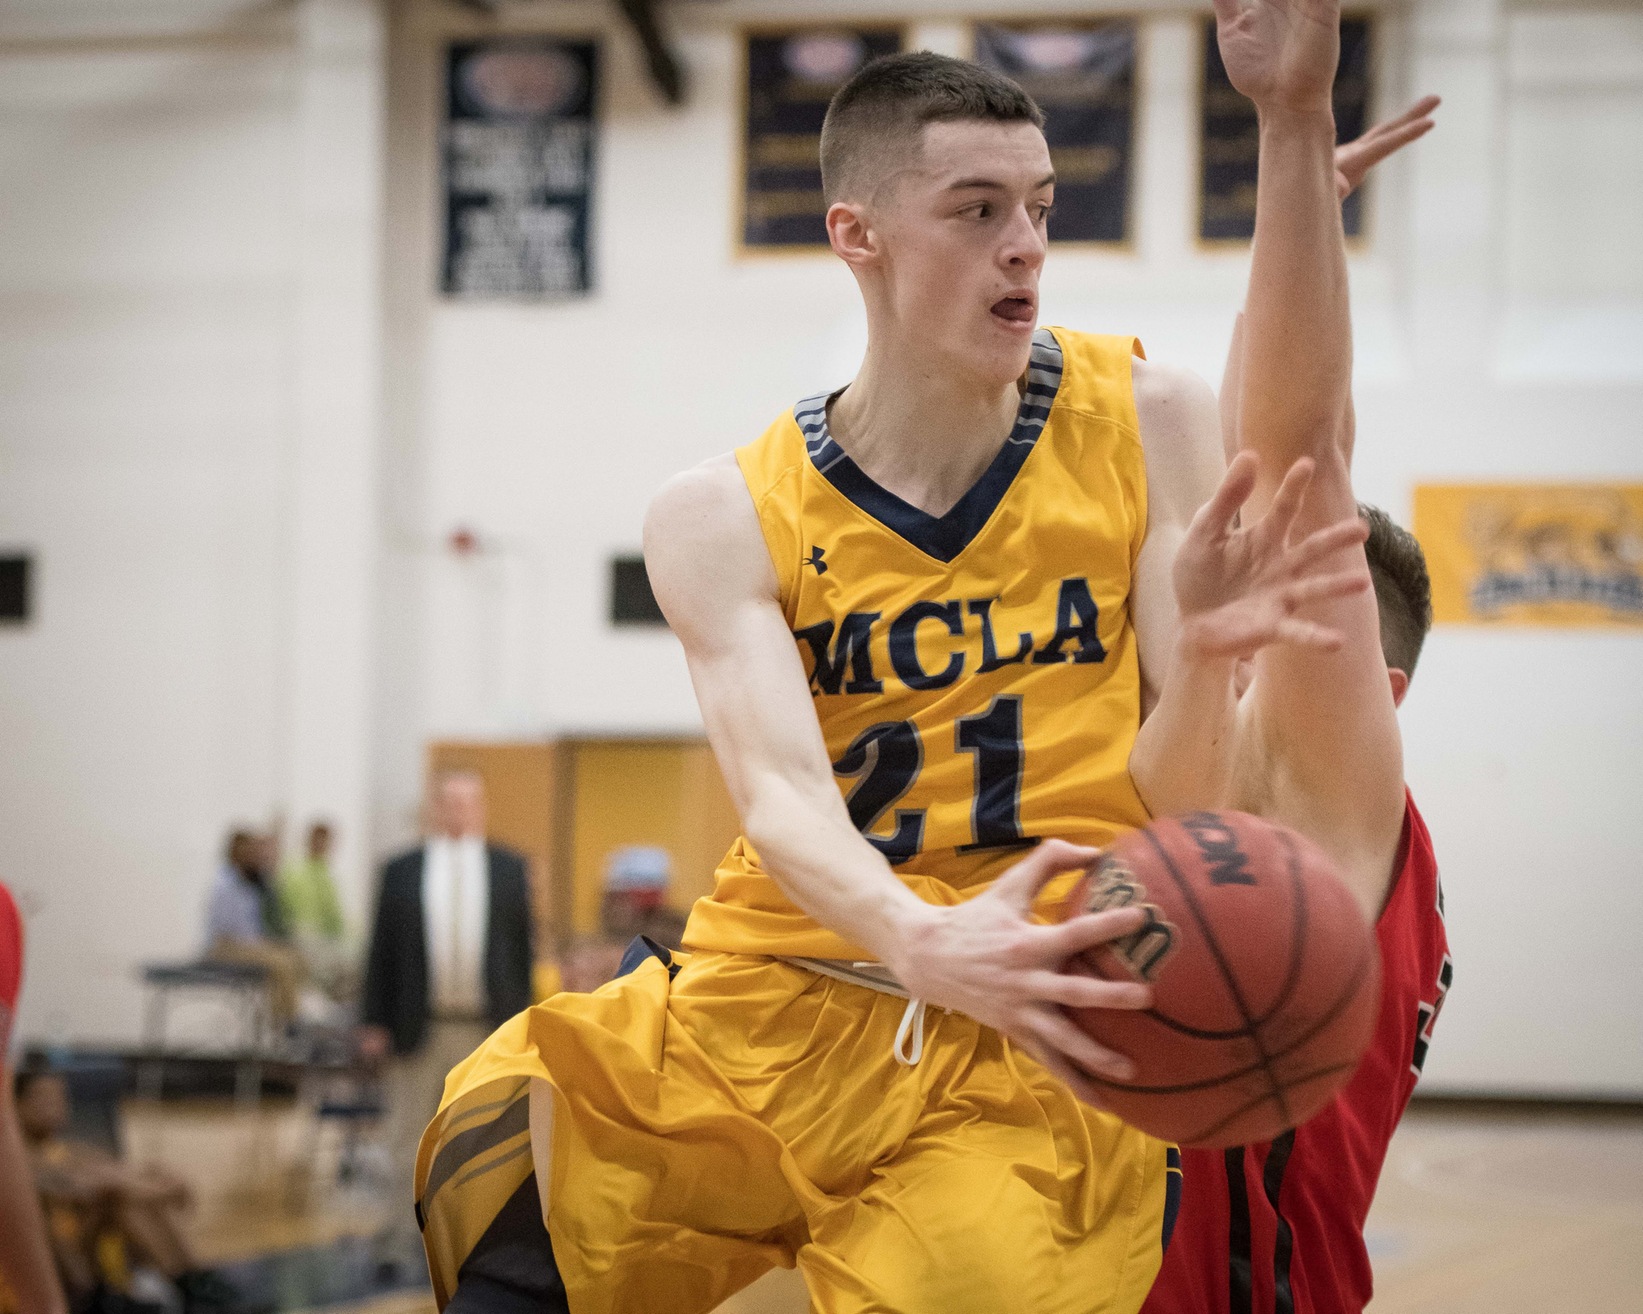 Yearsley, Conquest rally Men's basketball past Fitchburg State 79-75